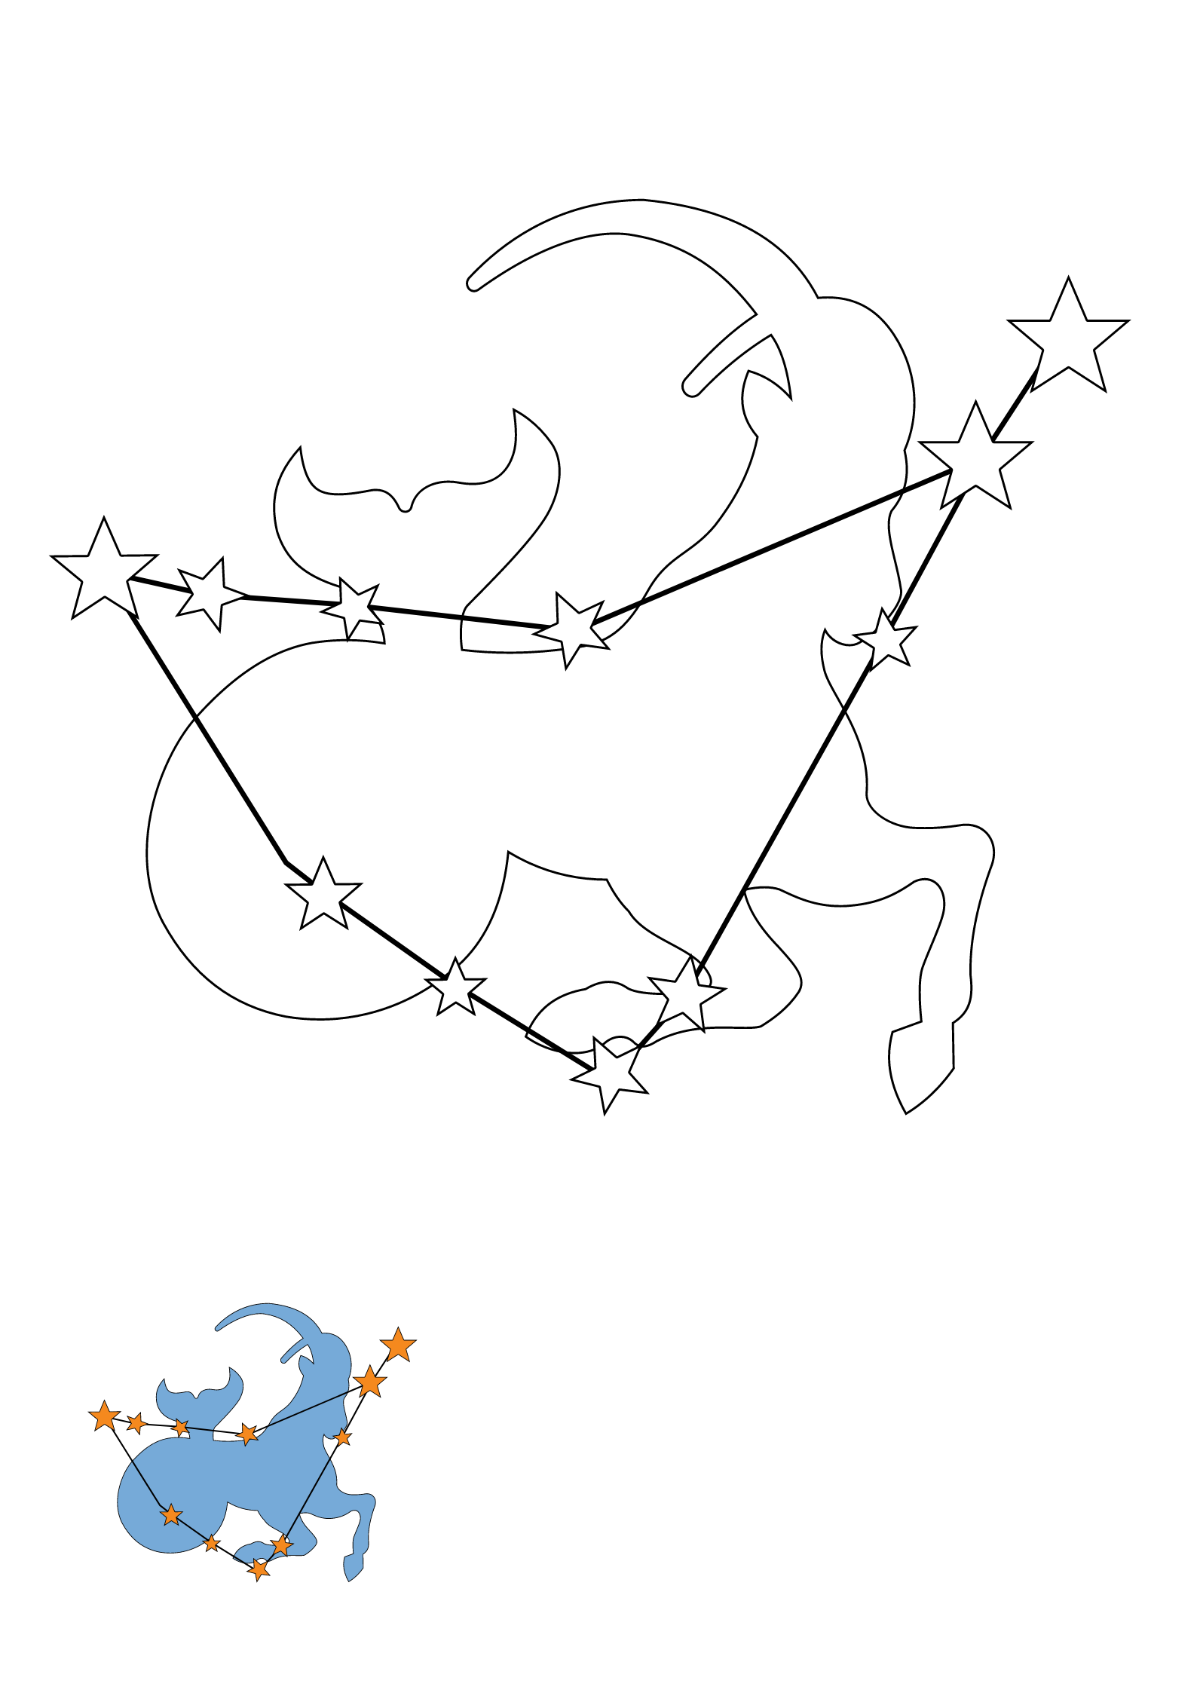 Capricorn Constellation coloring page Template